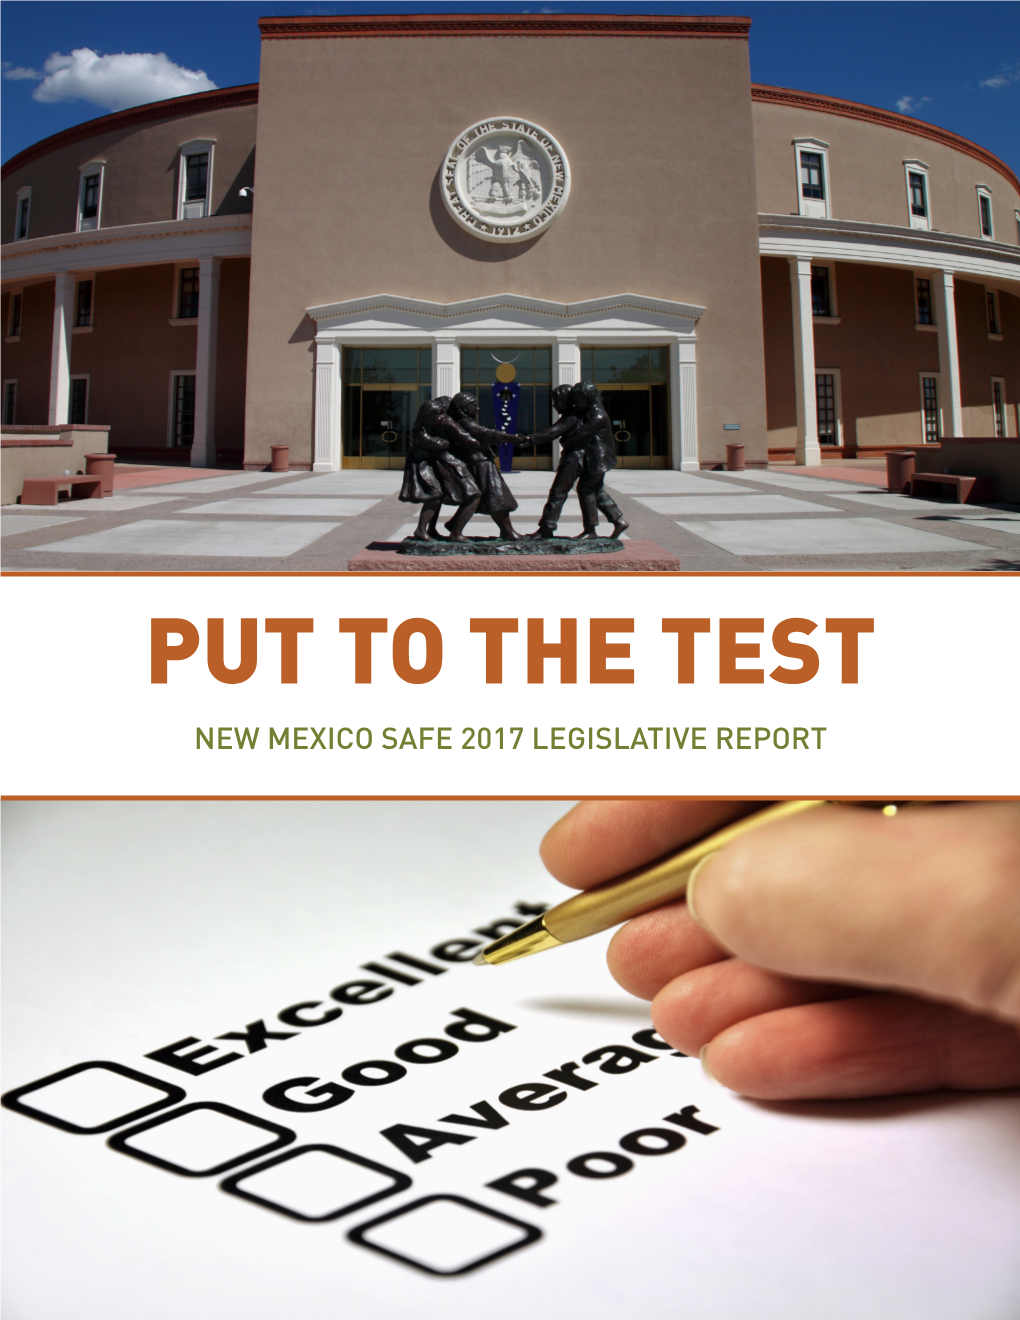 Put to the Test New Mexico Safe 2017 Legislative Report